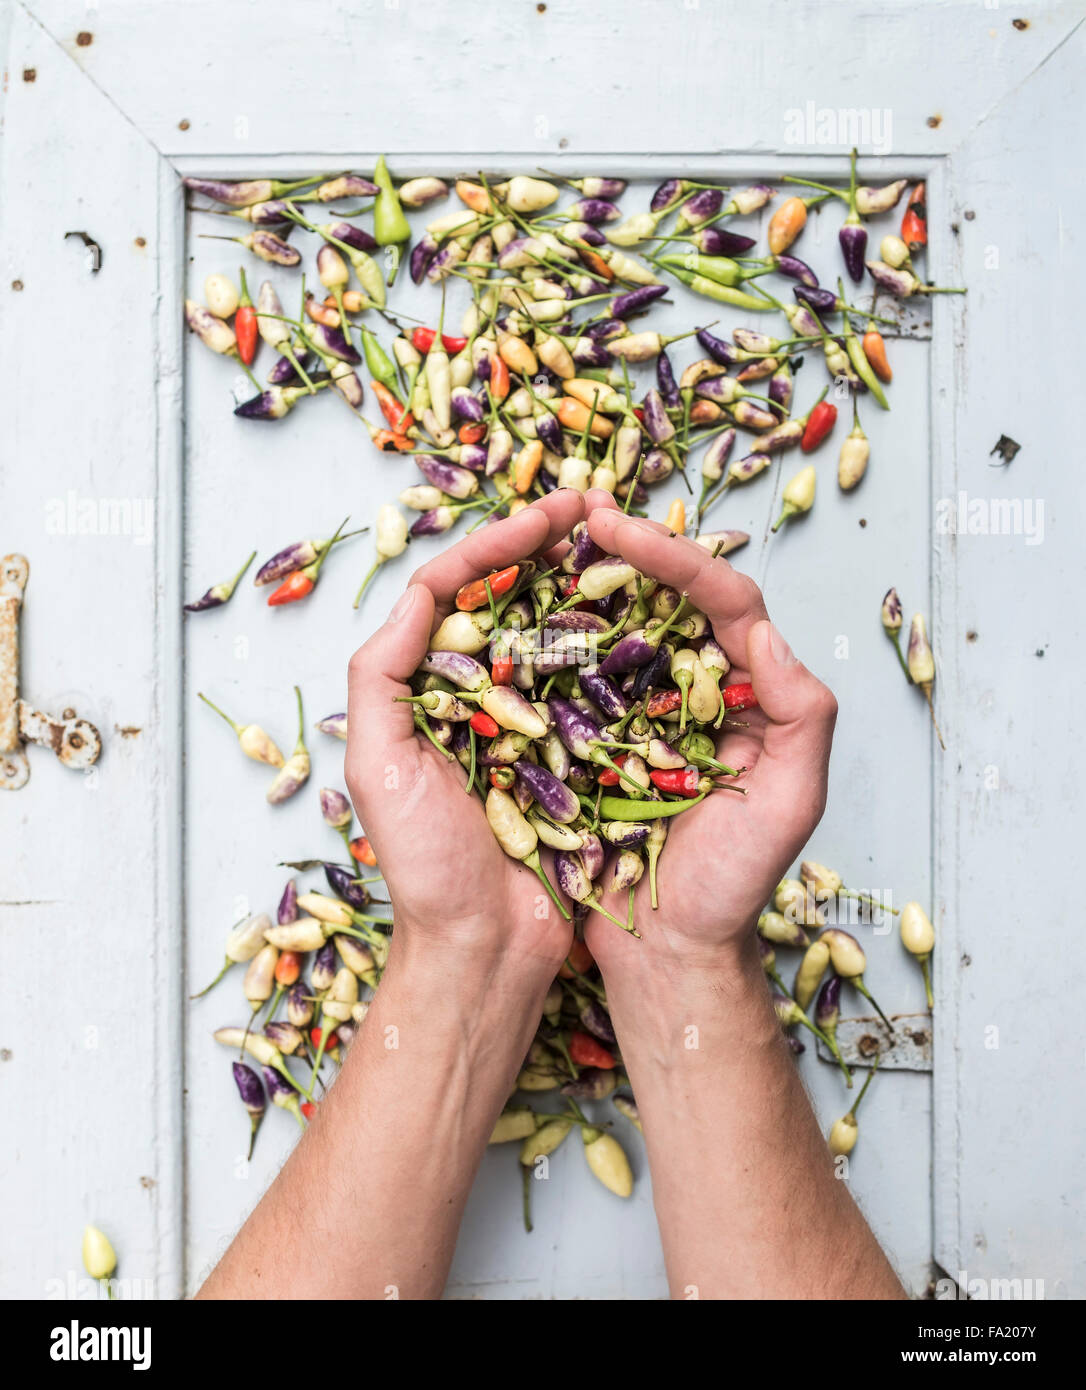 Man's hands keeping handful of small hot Turkish chili peppers, top view Stock Photo